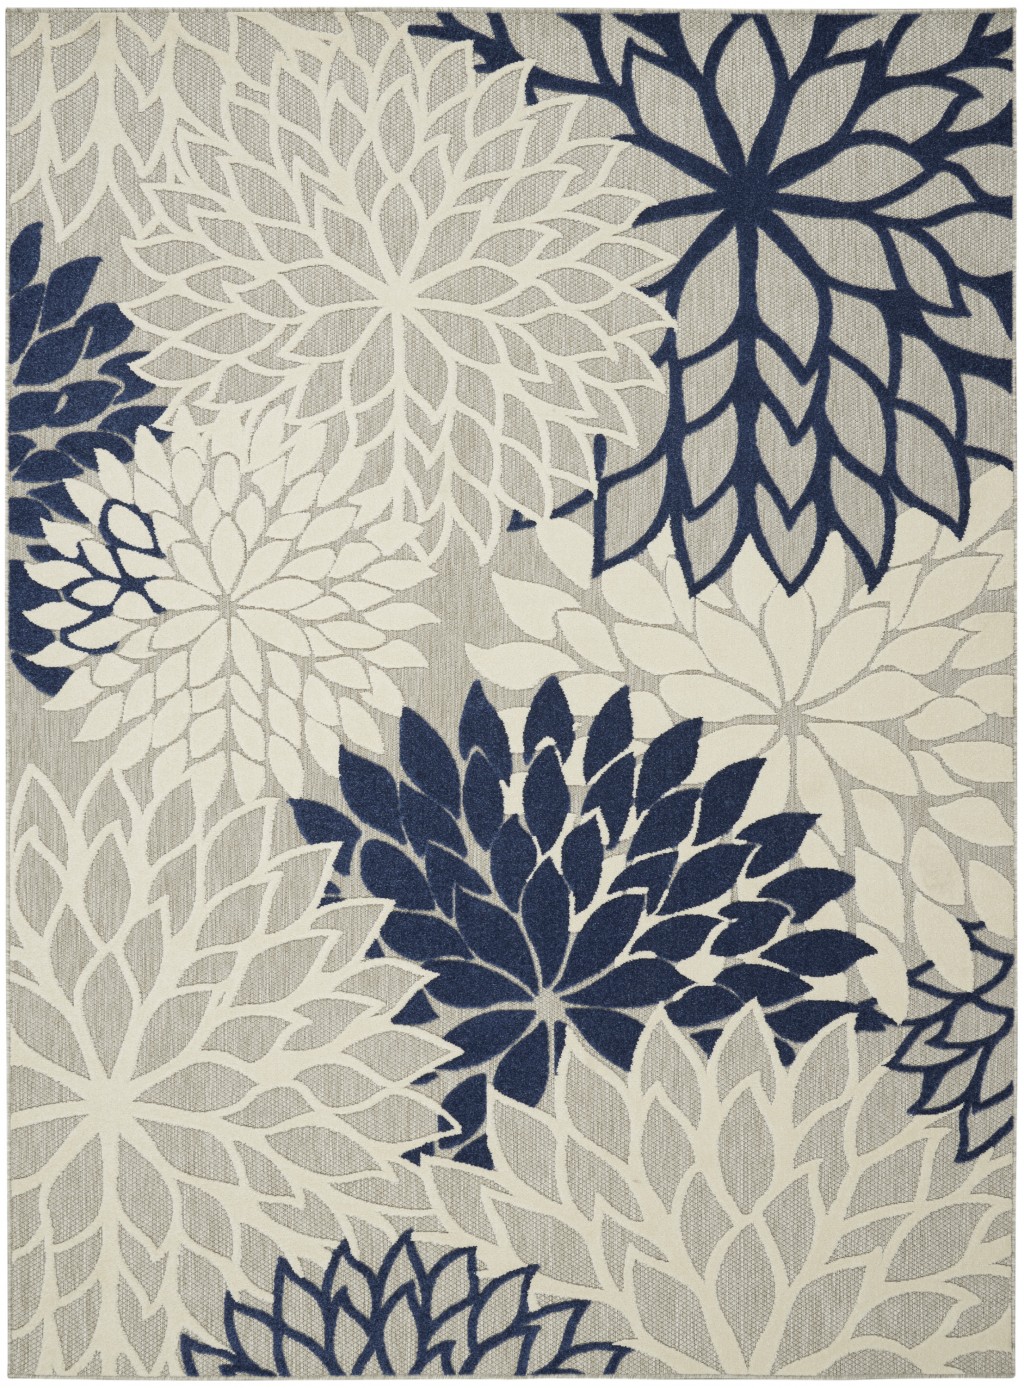 7' X 10' Ivory And Blue Floral Indoor Outdoor Area Rug-384836-1